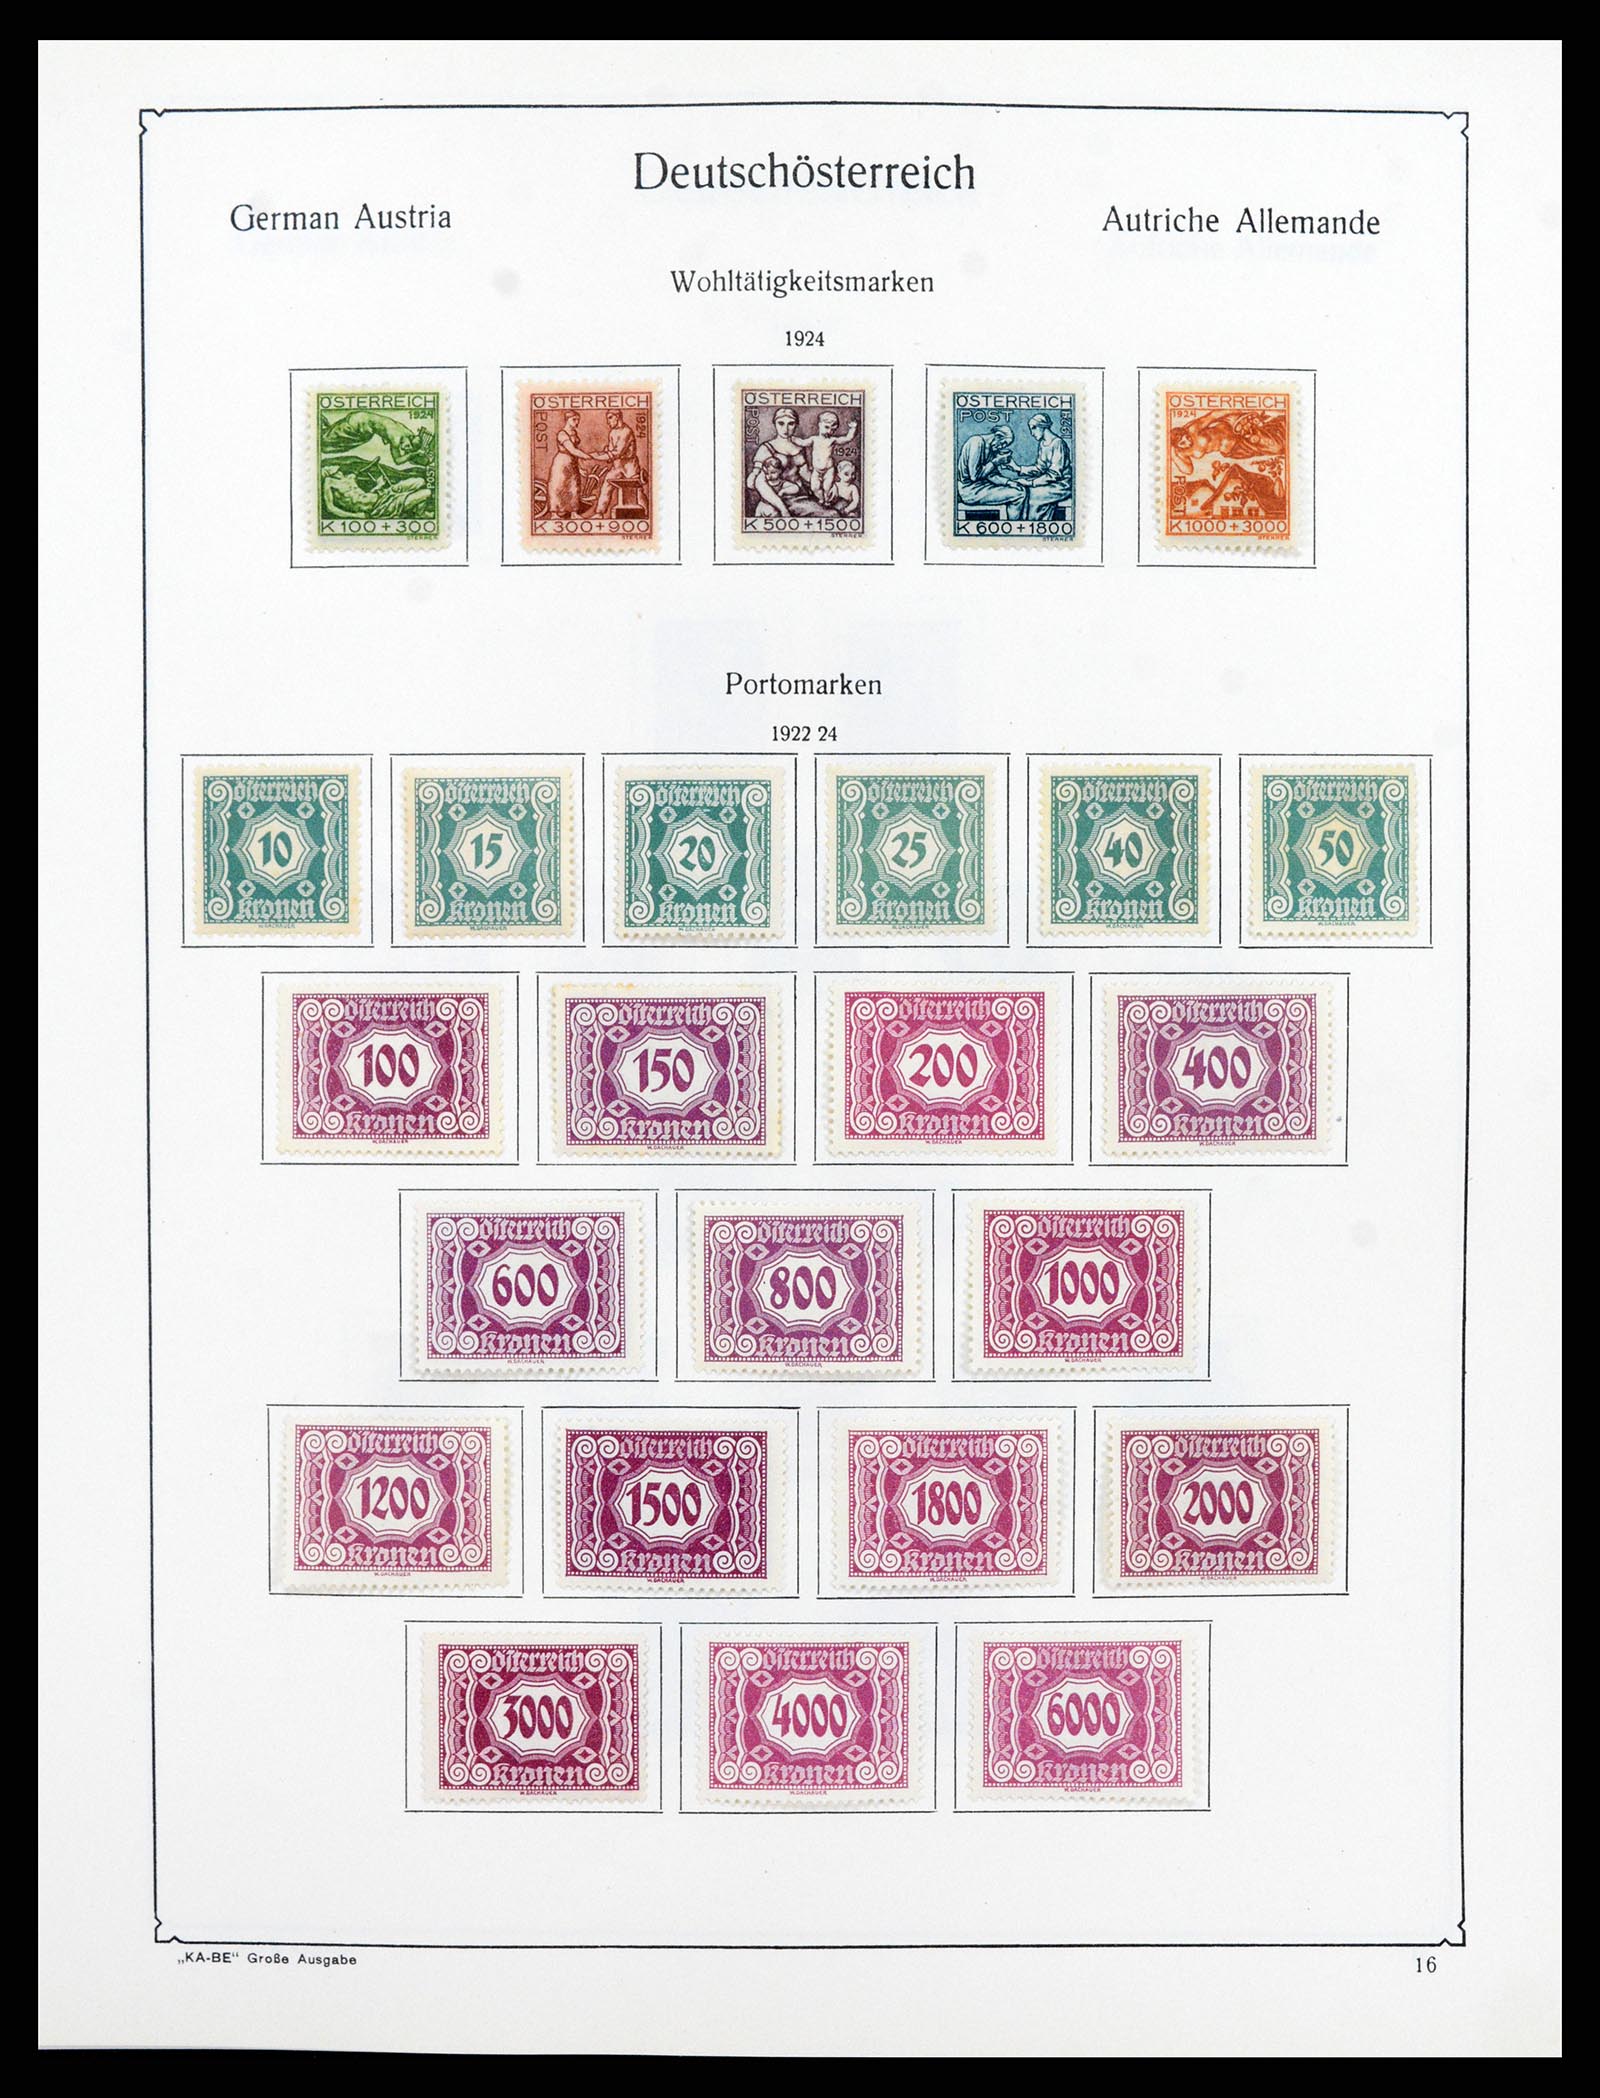 37960 074 - Stamp collection 37960 Austria and territories 1850-1984.